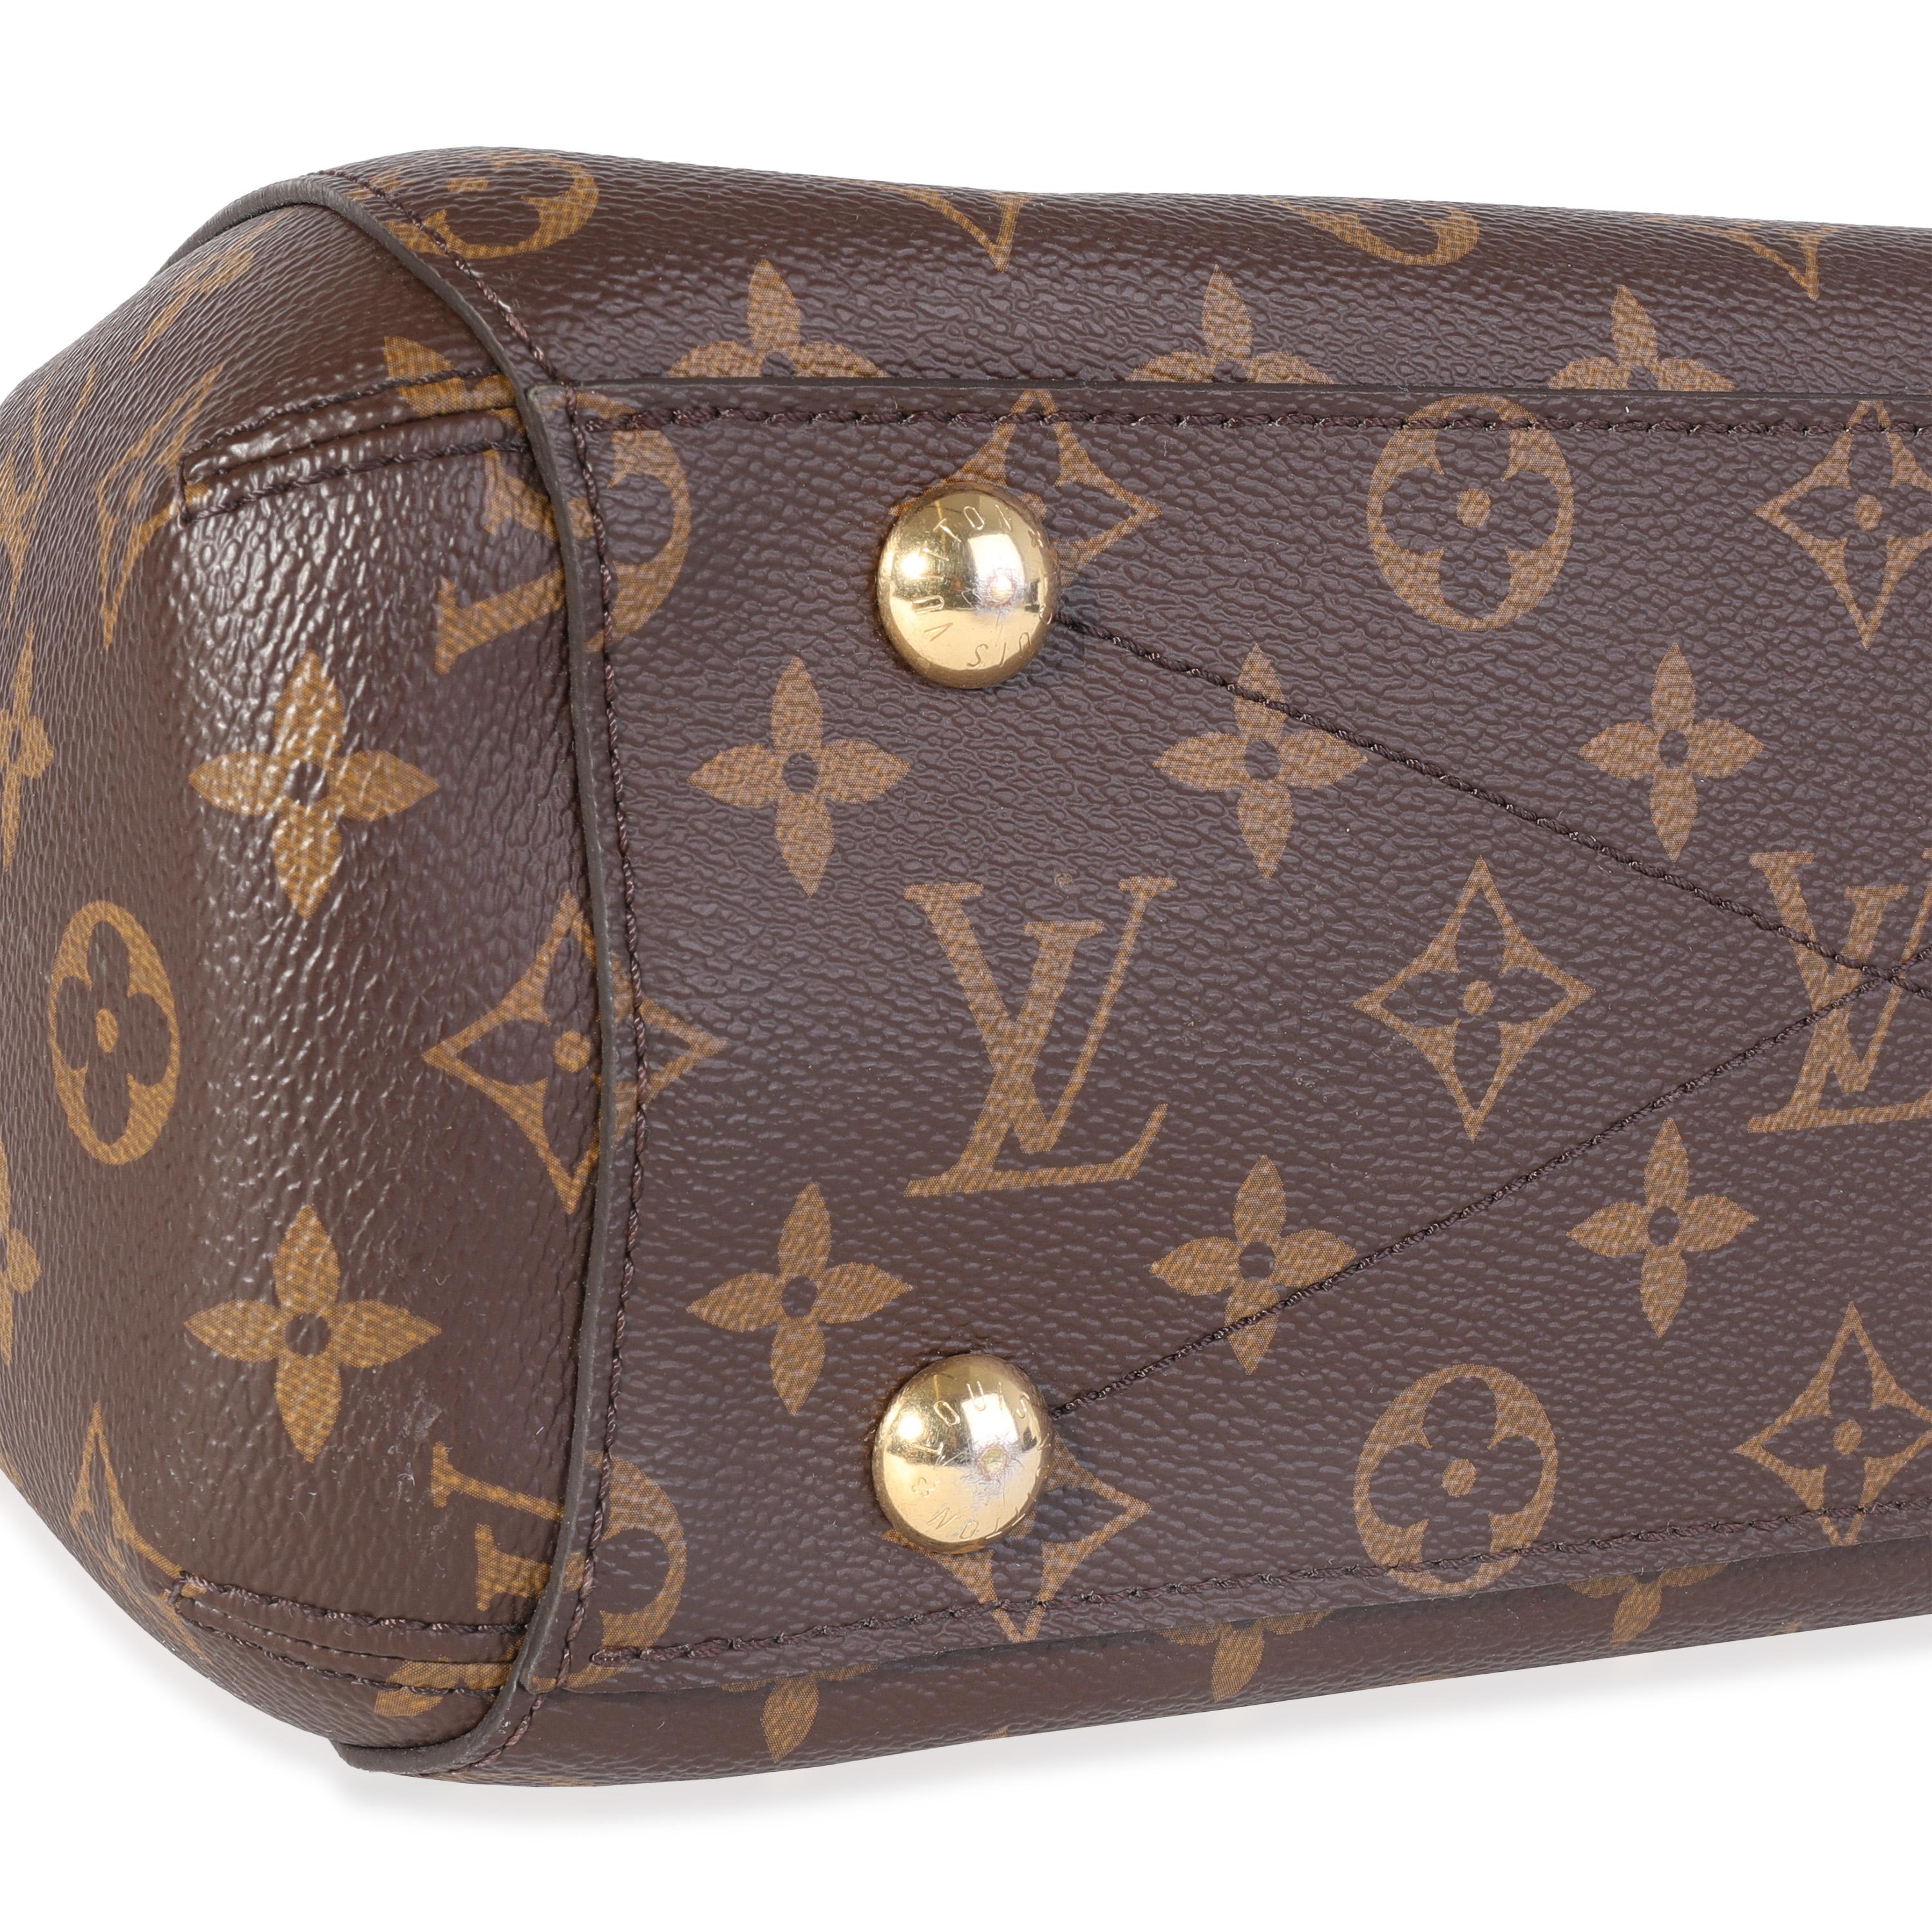 Listing Title: Louis Vuitton Monogram Canvas Montaigne BB
SKU: 120106
MSRP: 2780.00
Condition: Pre-owned (3000)
Handbag Condition: Very Good
Condition Comments: Feet scratched. Handles and trim show some discoloration. Interior shows signs of